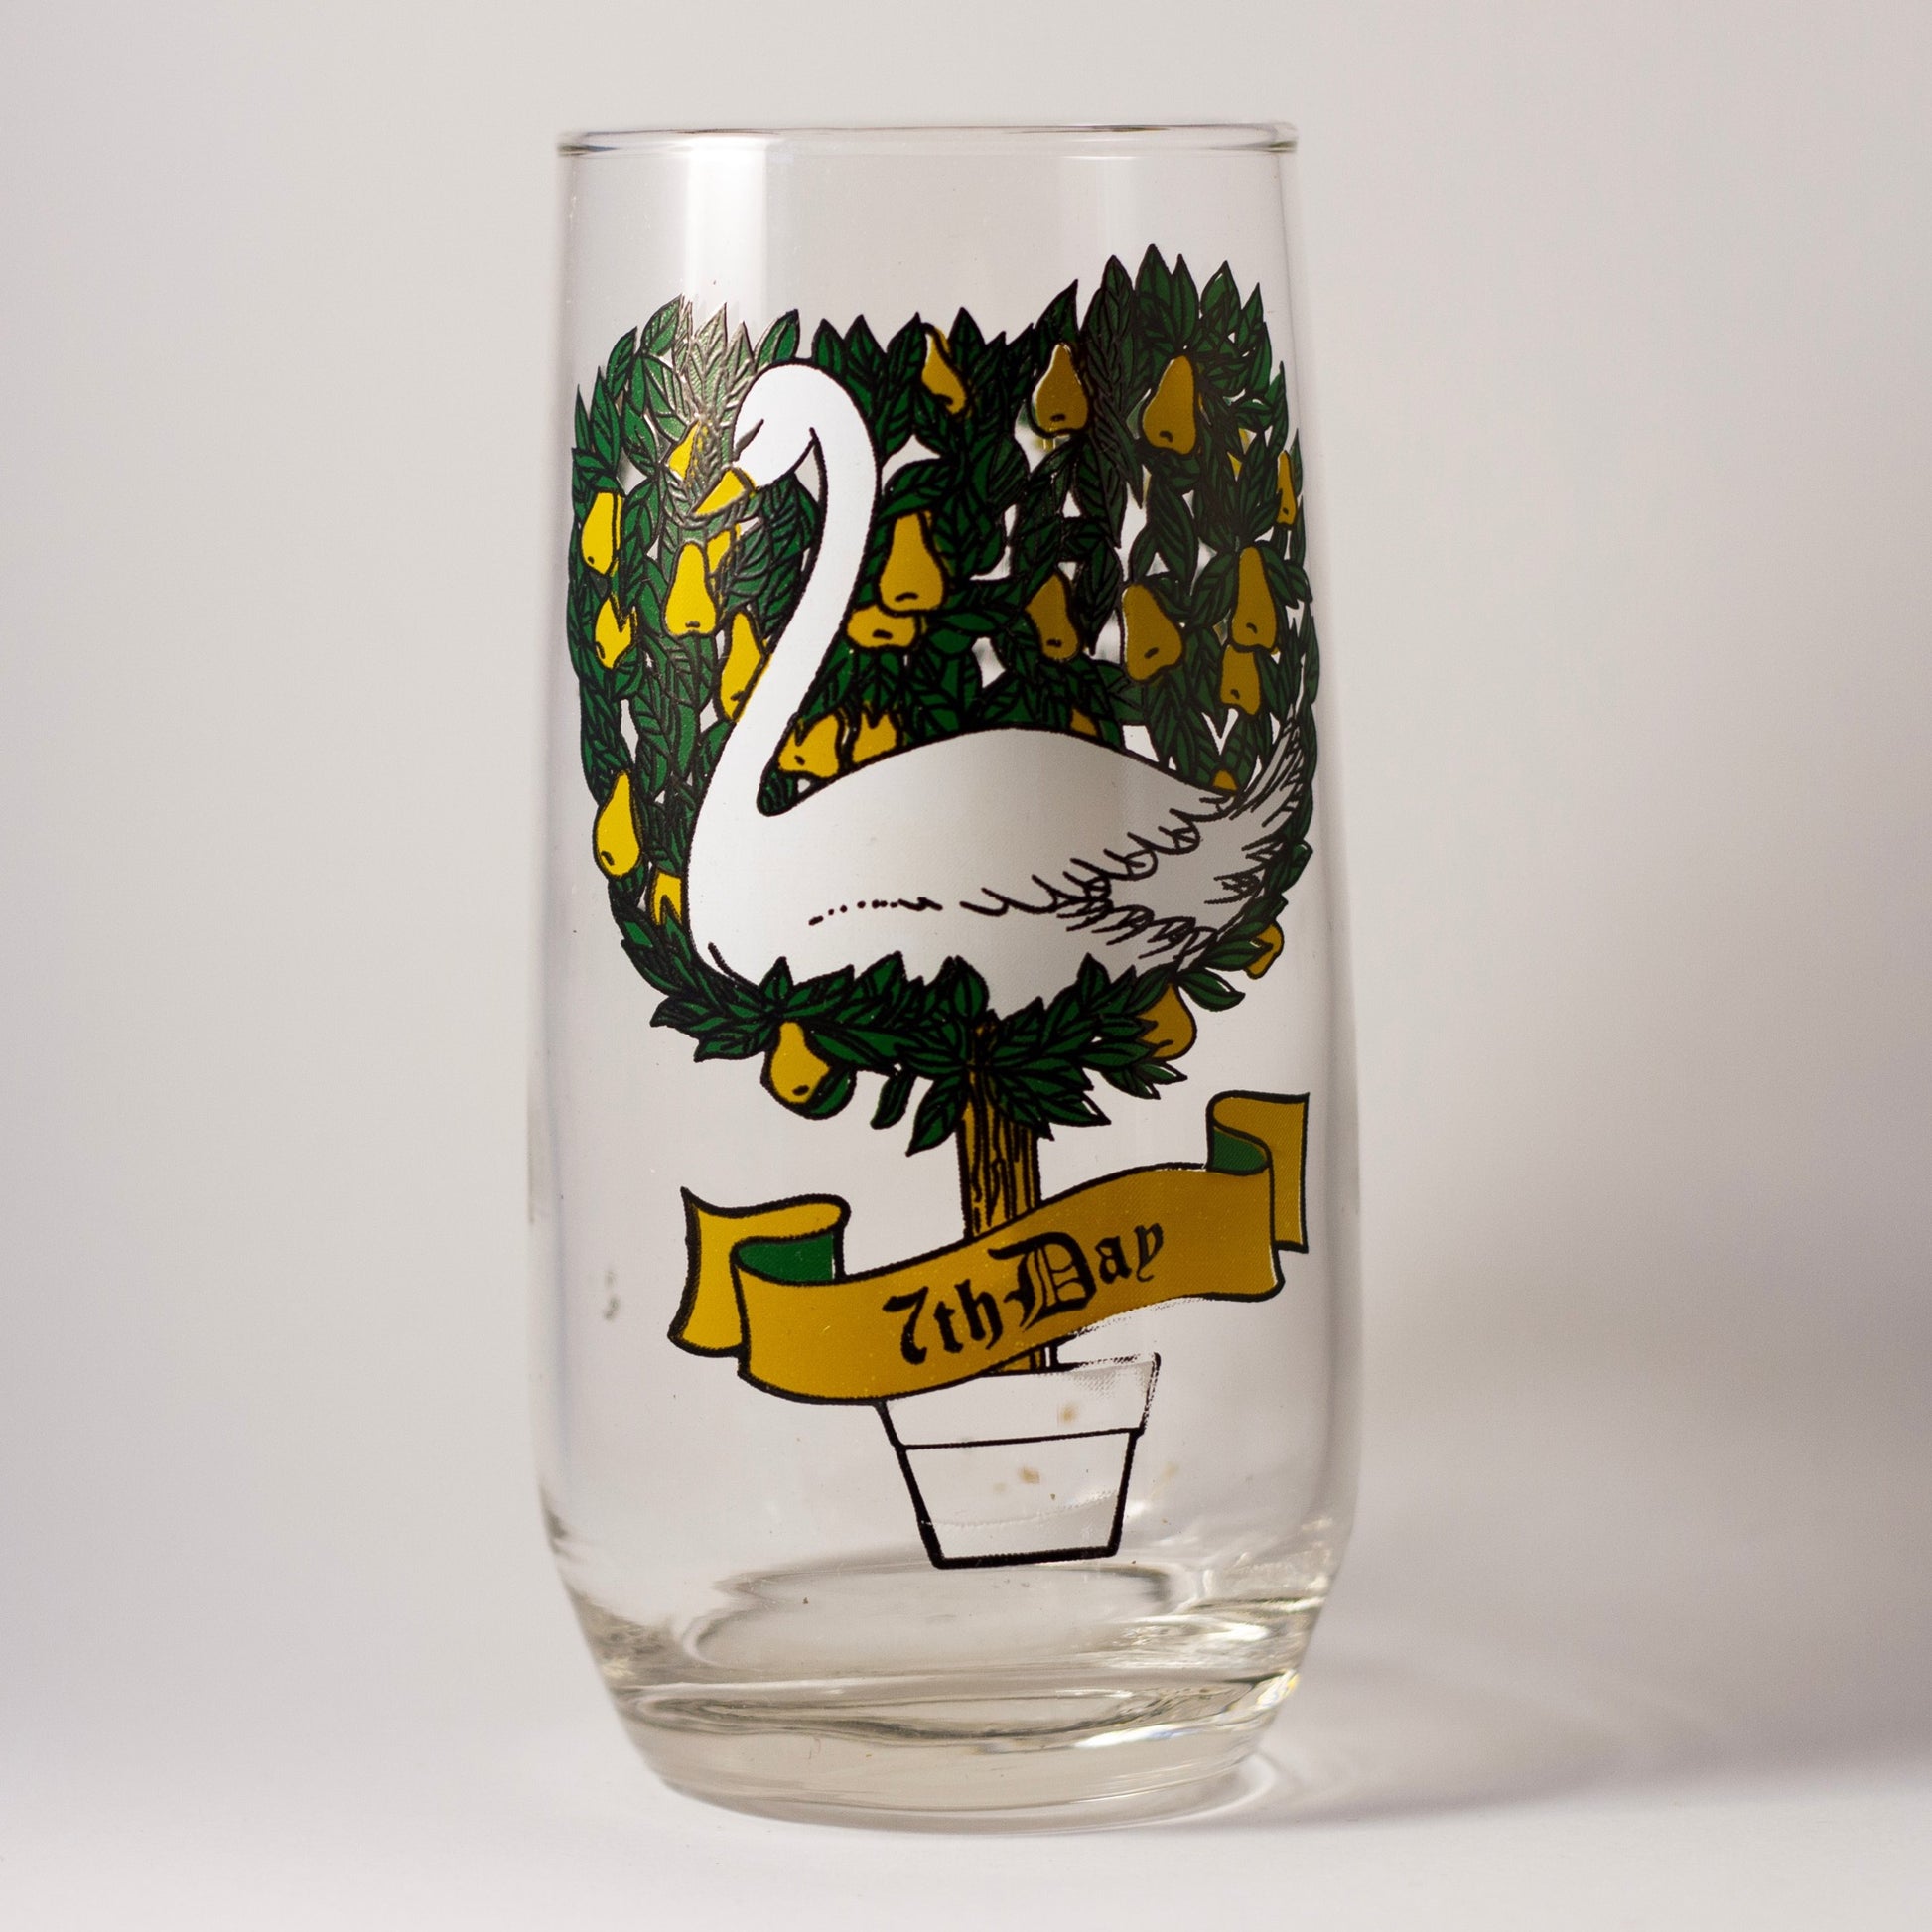 12 Days of Christmas Drinking Glass